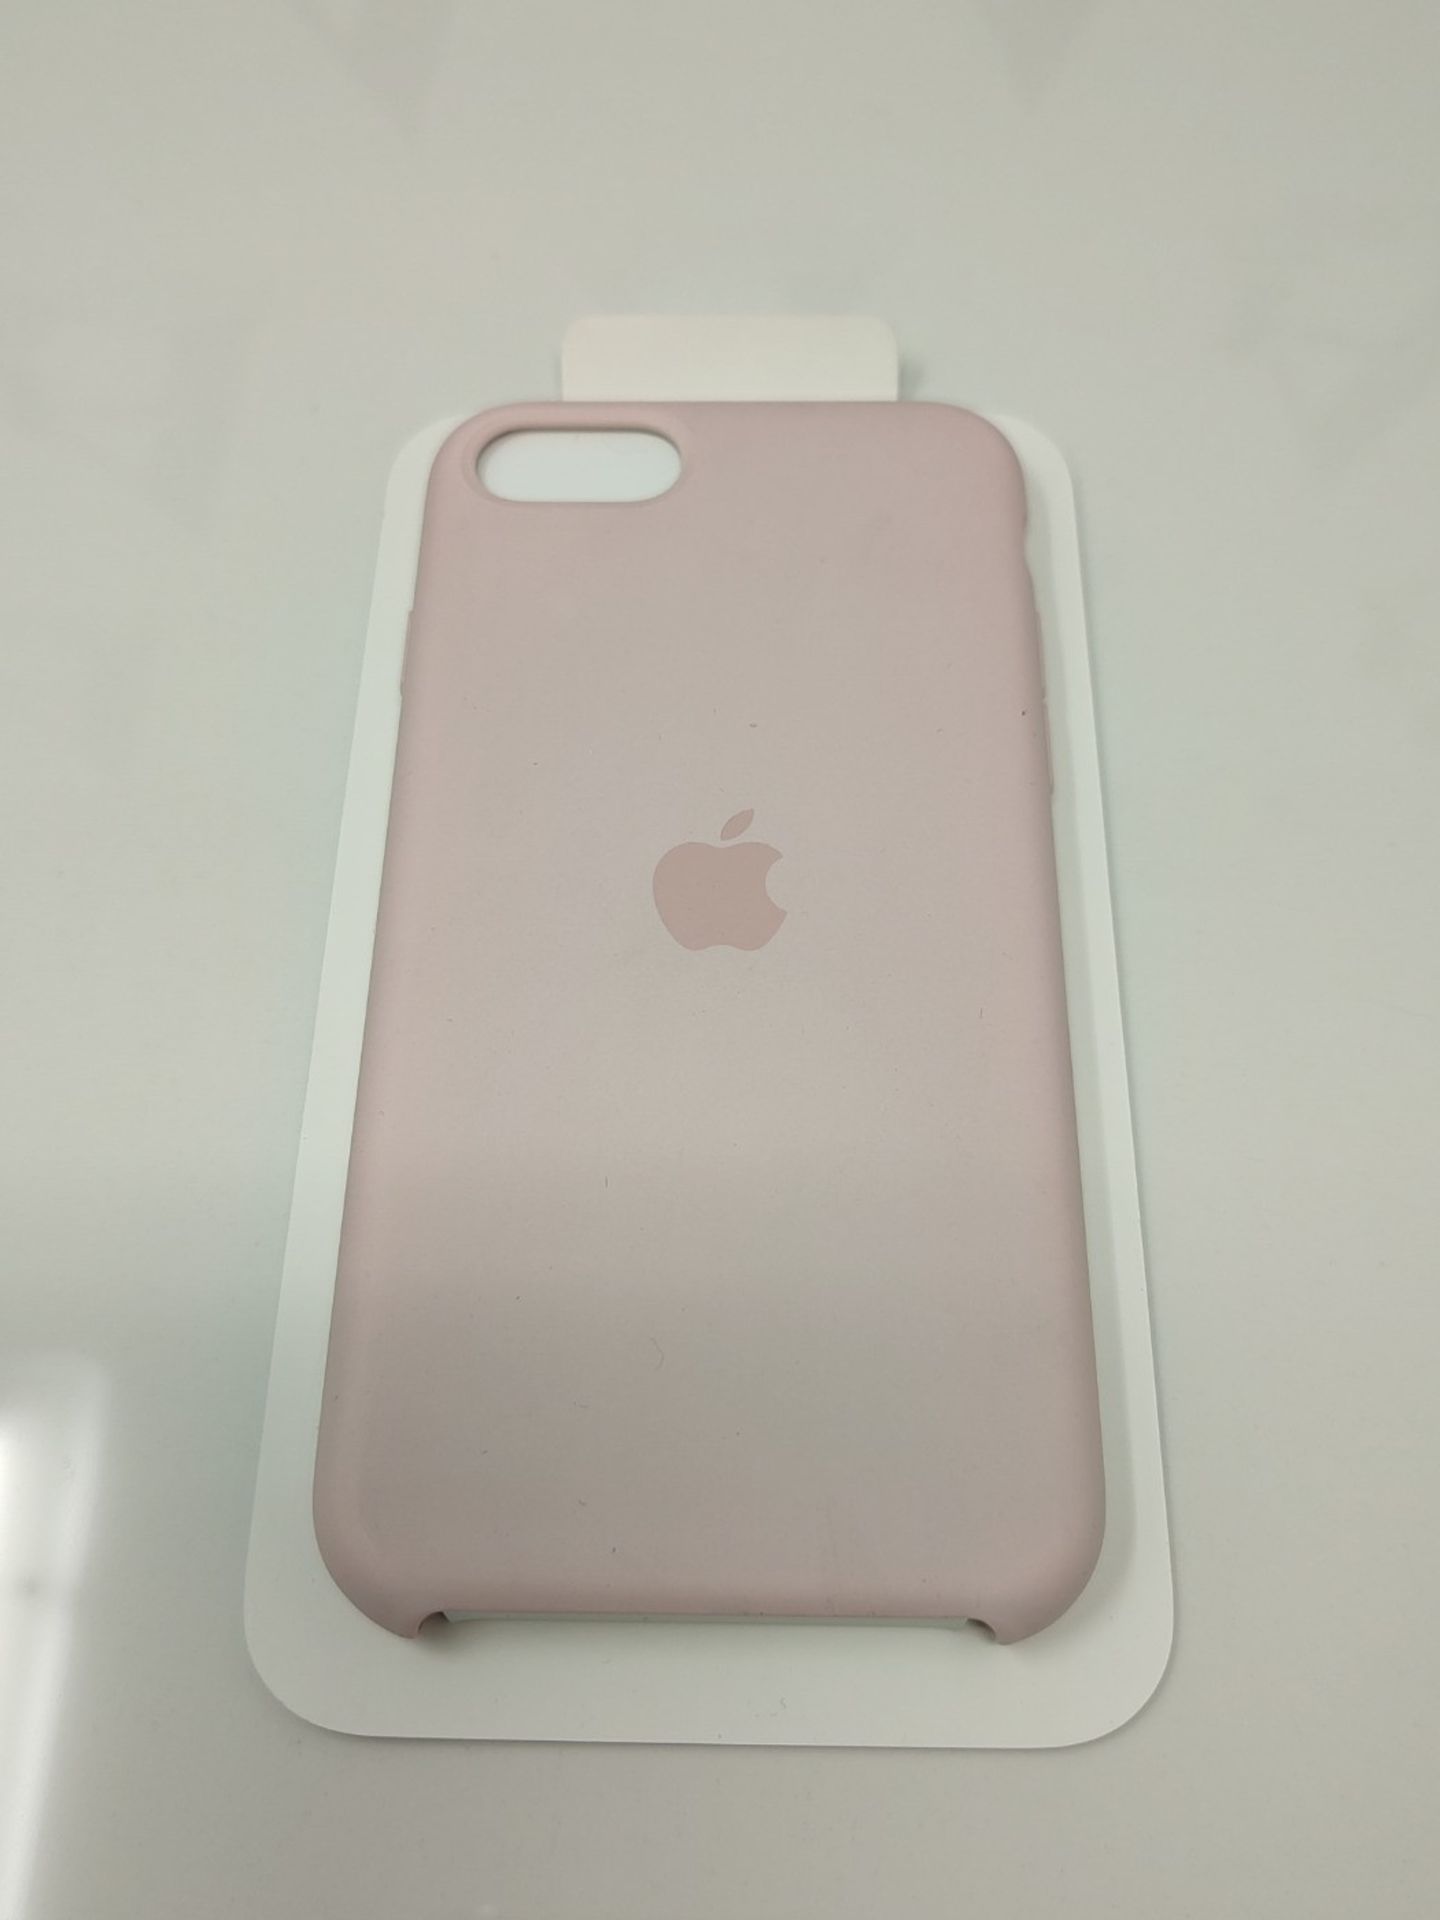 Apple Silicone Case (for iPhone SE) - Chalk Pink - Image 3 of 3